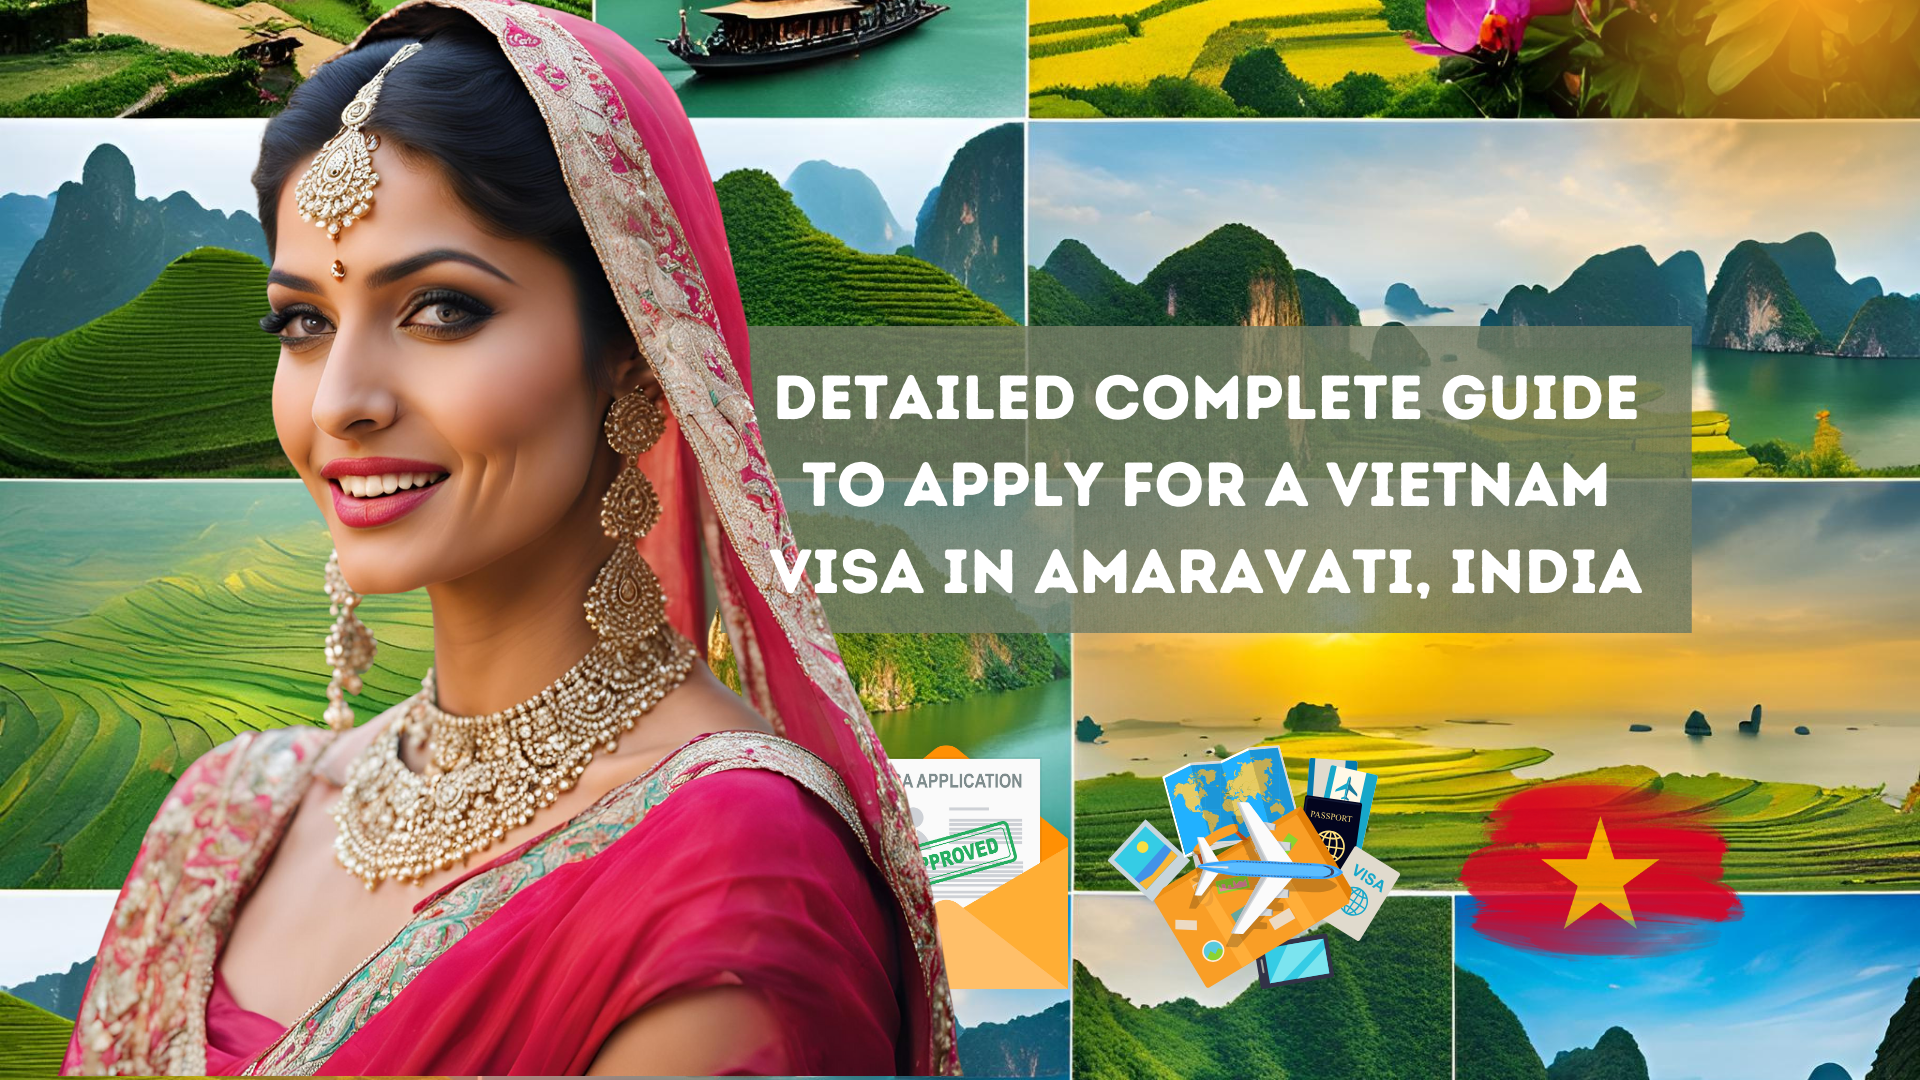 Detailed Complete Guide to Apply for a Vietnam Visa in Amaravati, India